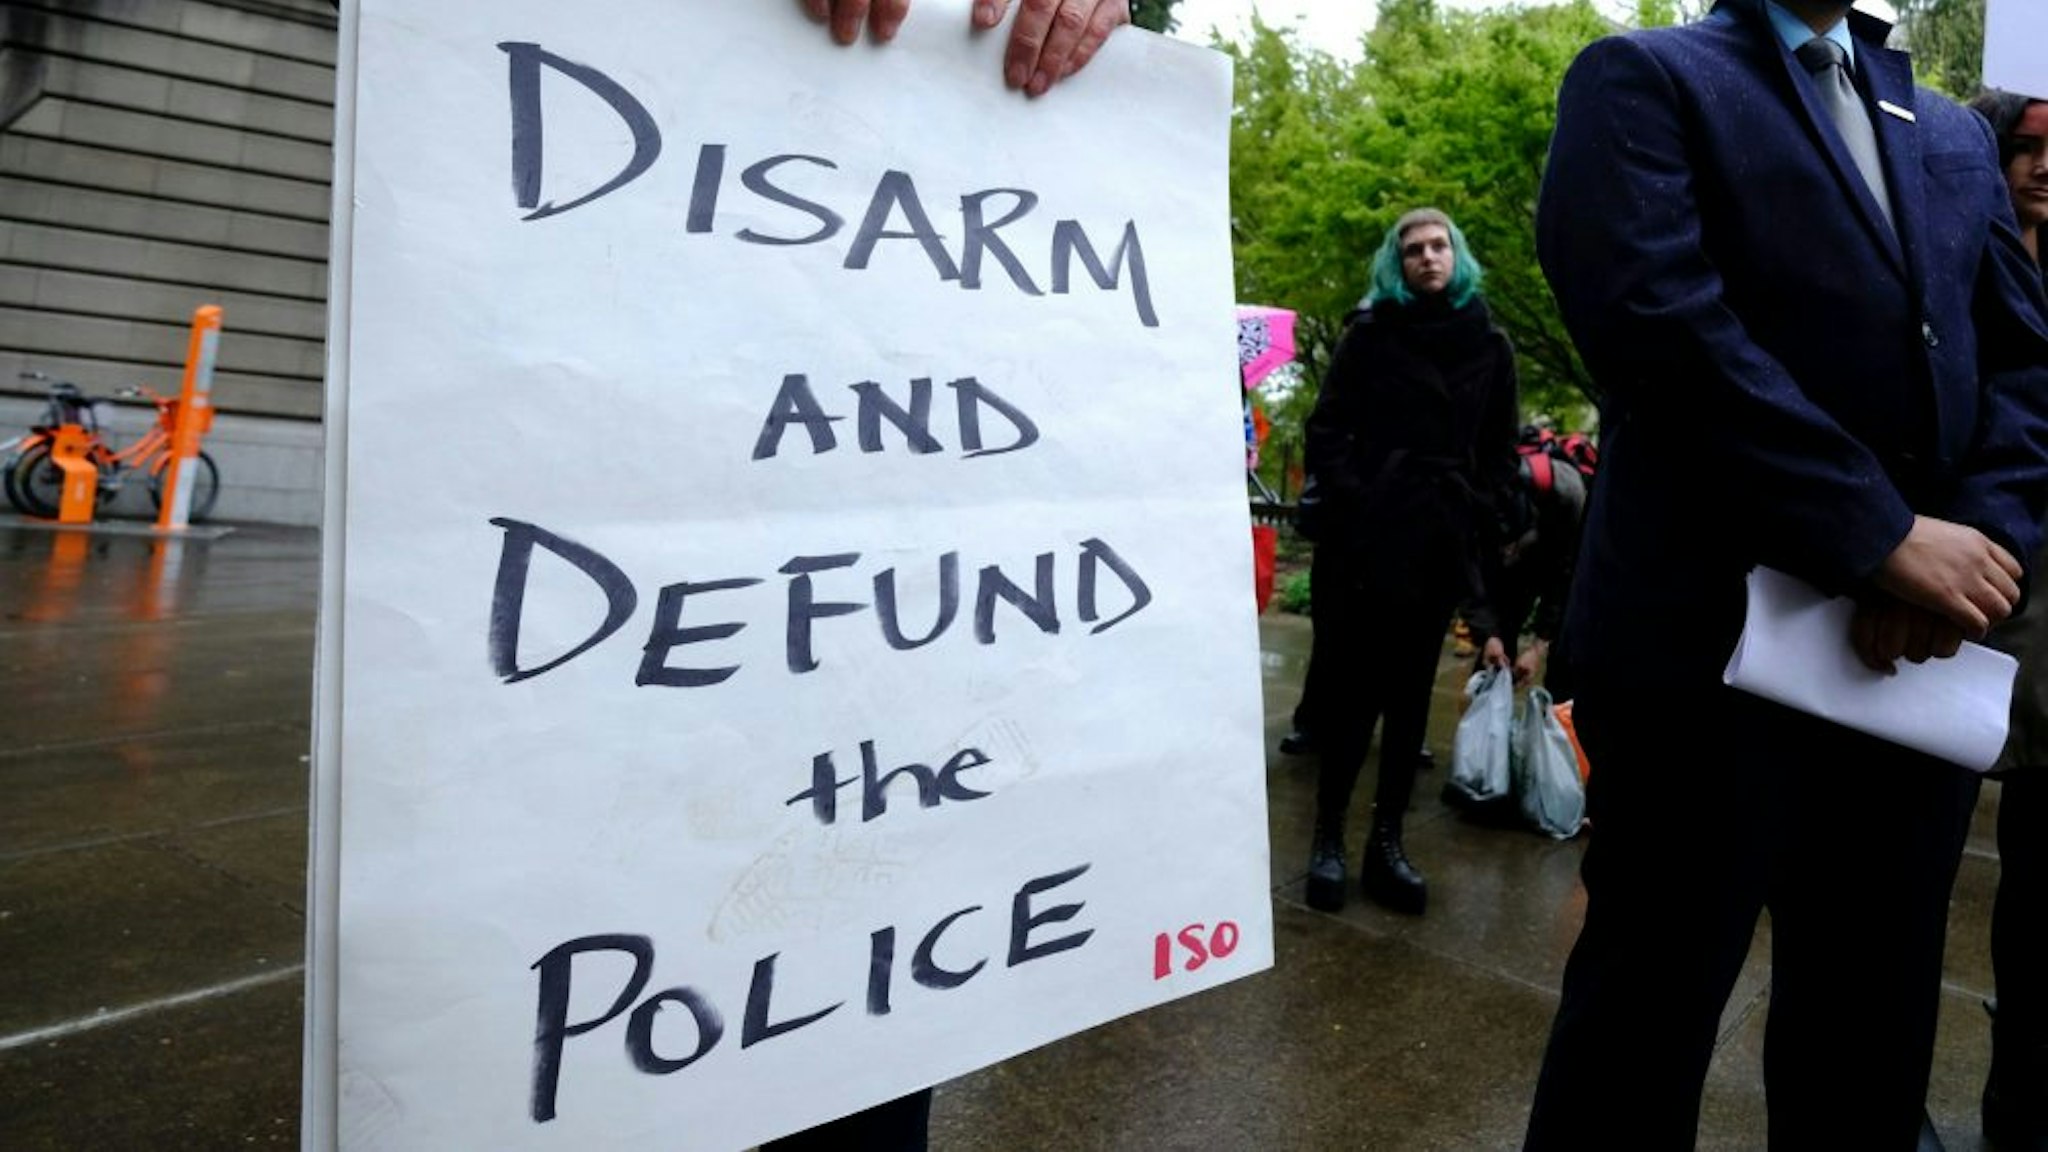 PORTLAND, USA - APRIL 11: A protester holds a sign reading "Disarm And Defund The Police" during a protest against fatal police shootings in Portland, Oregon, United States on April 11, 2018. John Andrew Elifritz, 48, was fatally shot by police after he reportedly fled from a stolen car and burst into a homeless shelter at the start of an alcoholics anonymous meeting last Saturday.